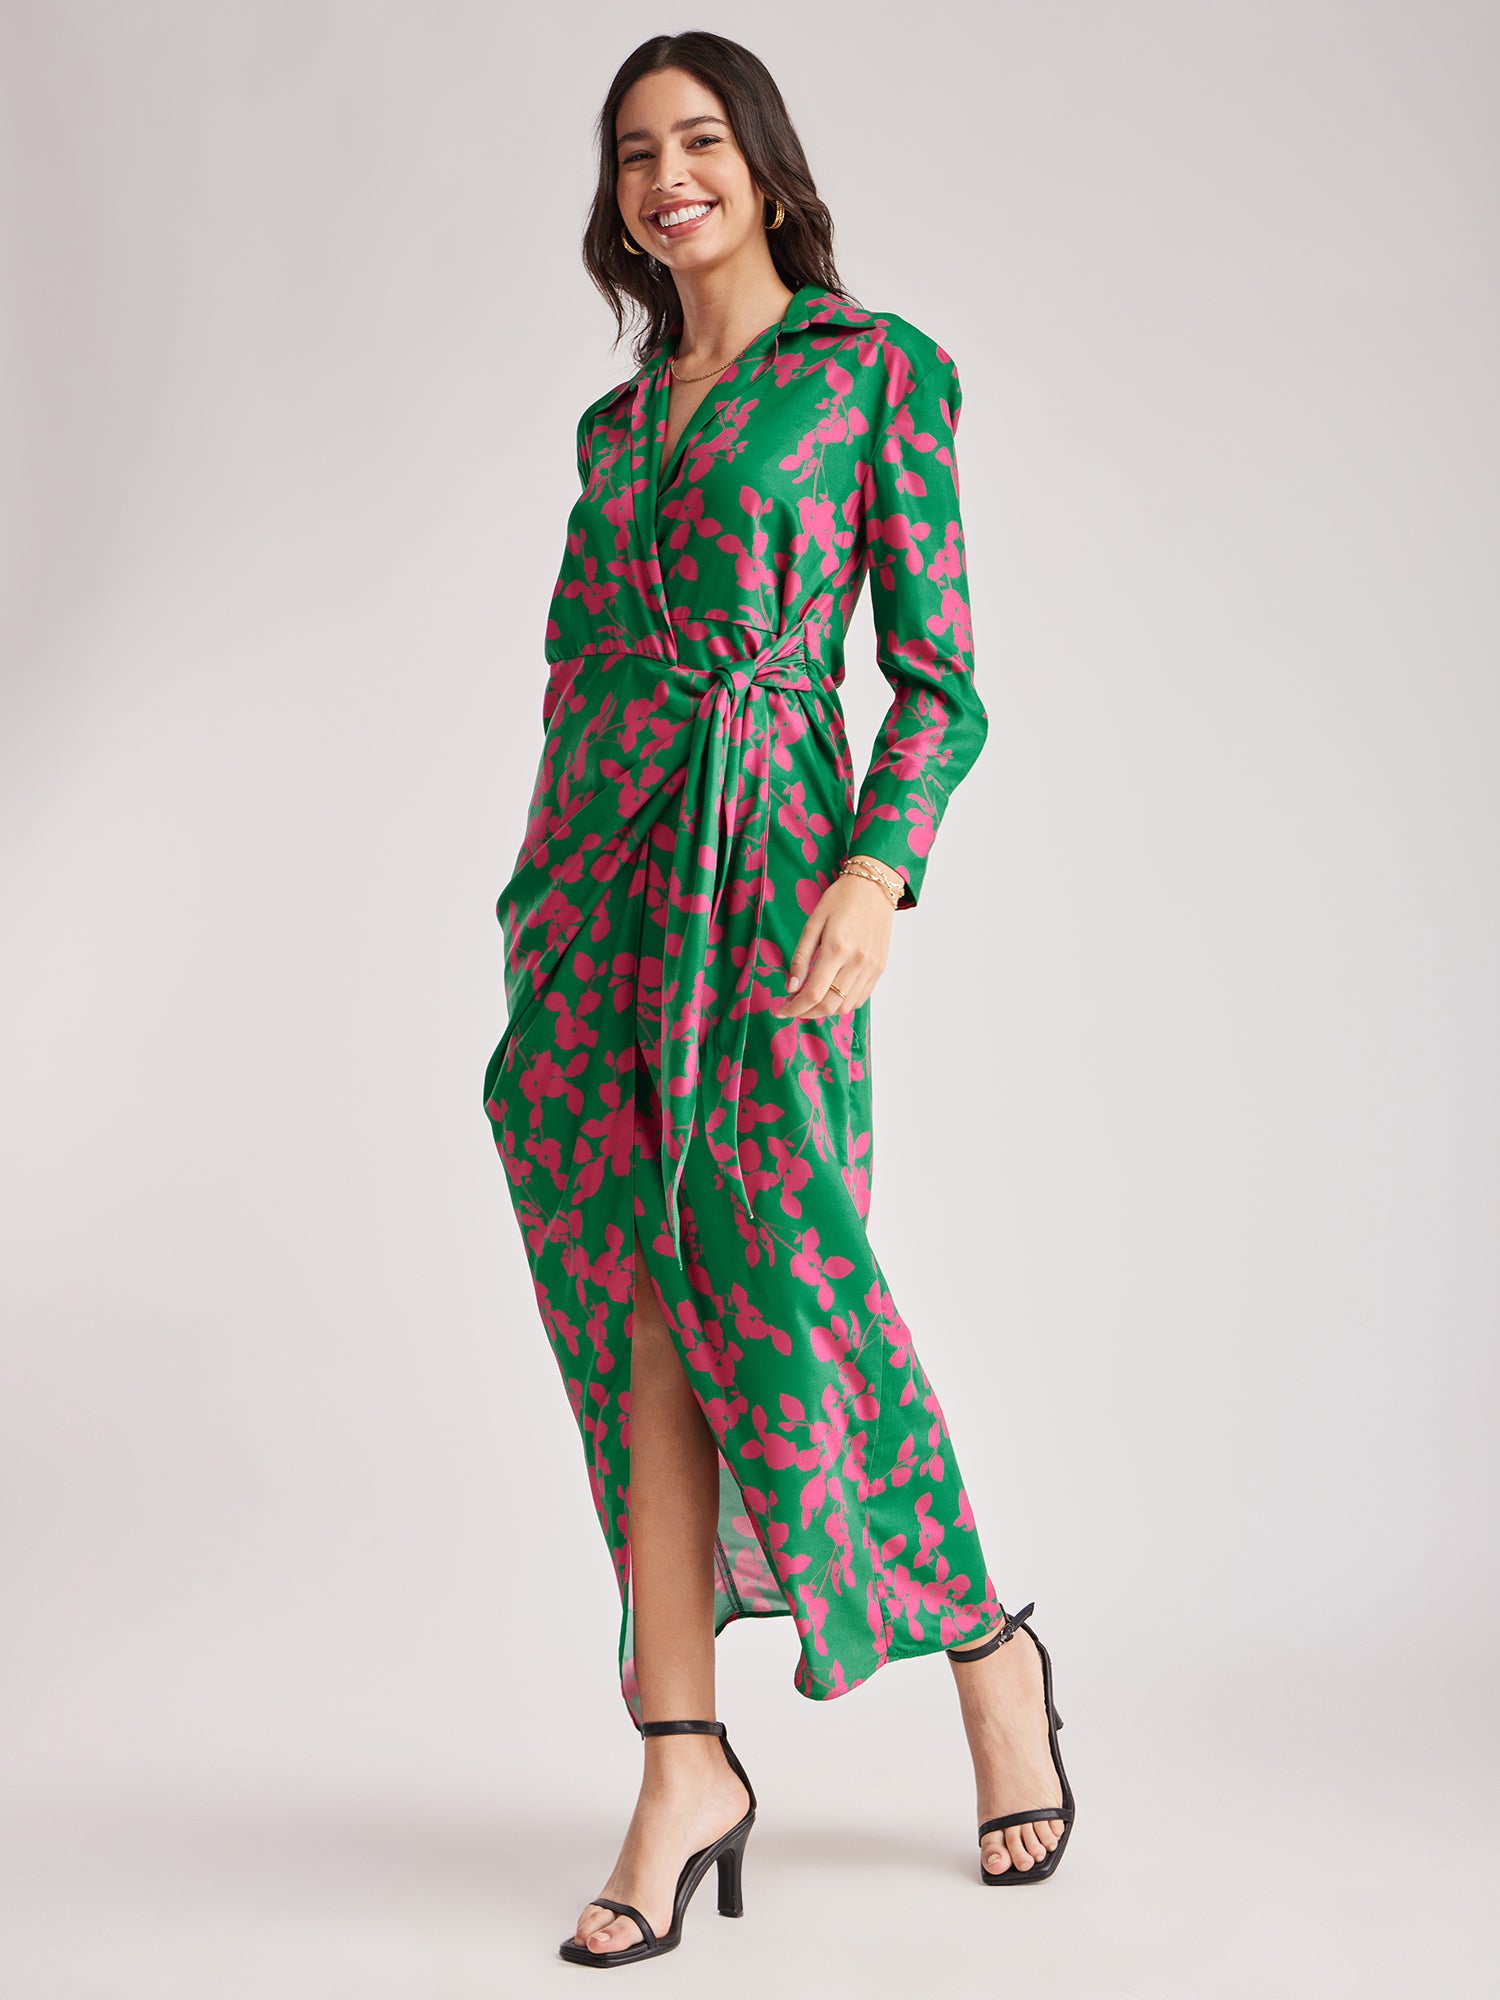 Floral Print Wrap Dress - Green And Pink